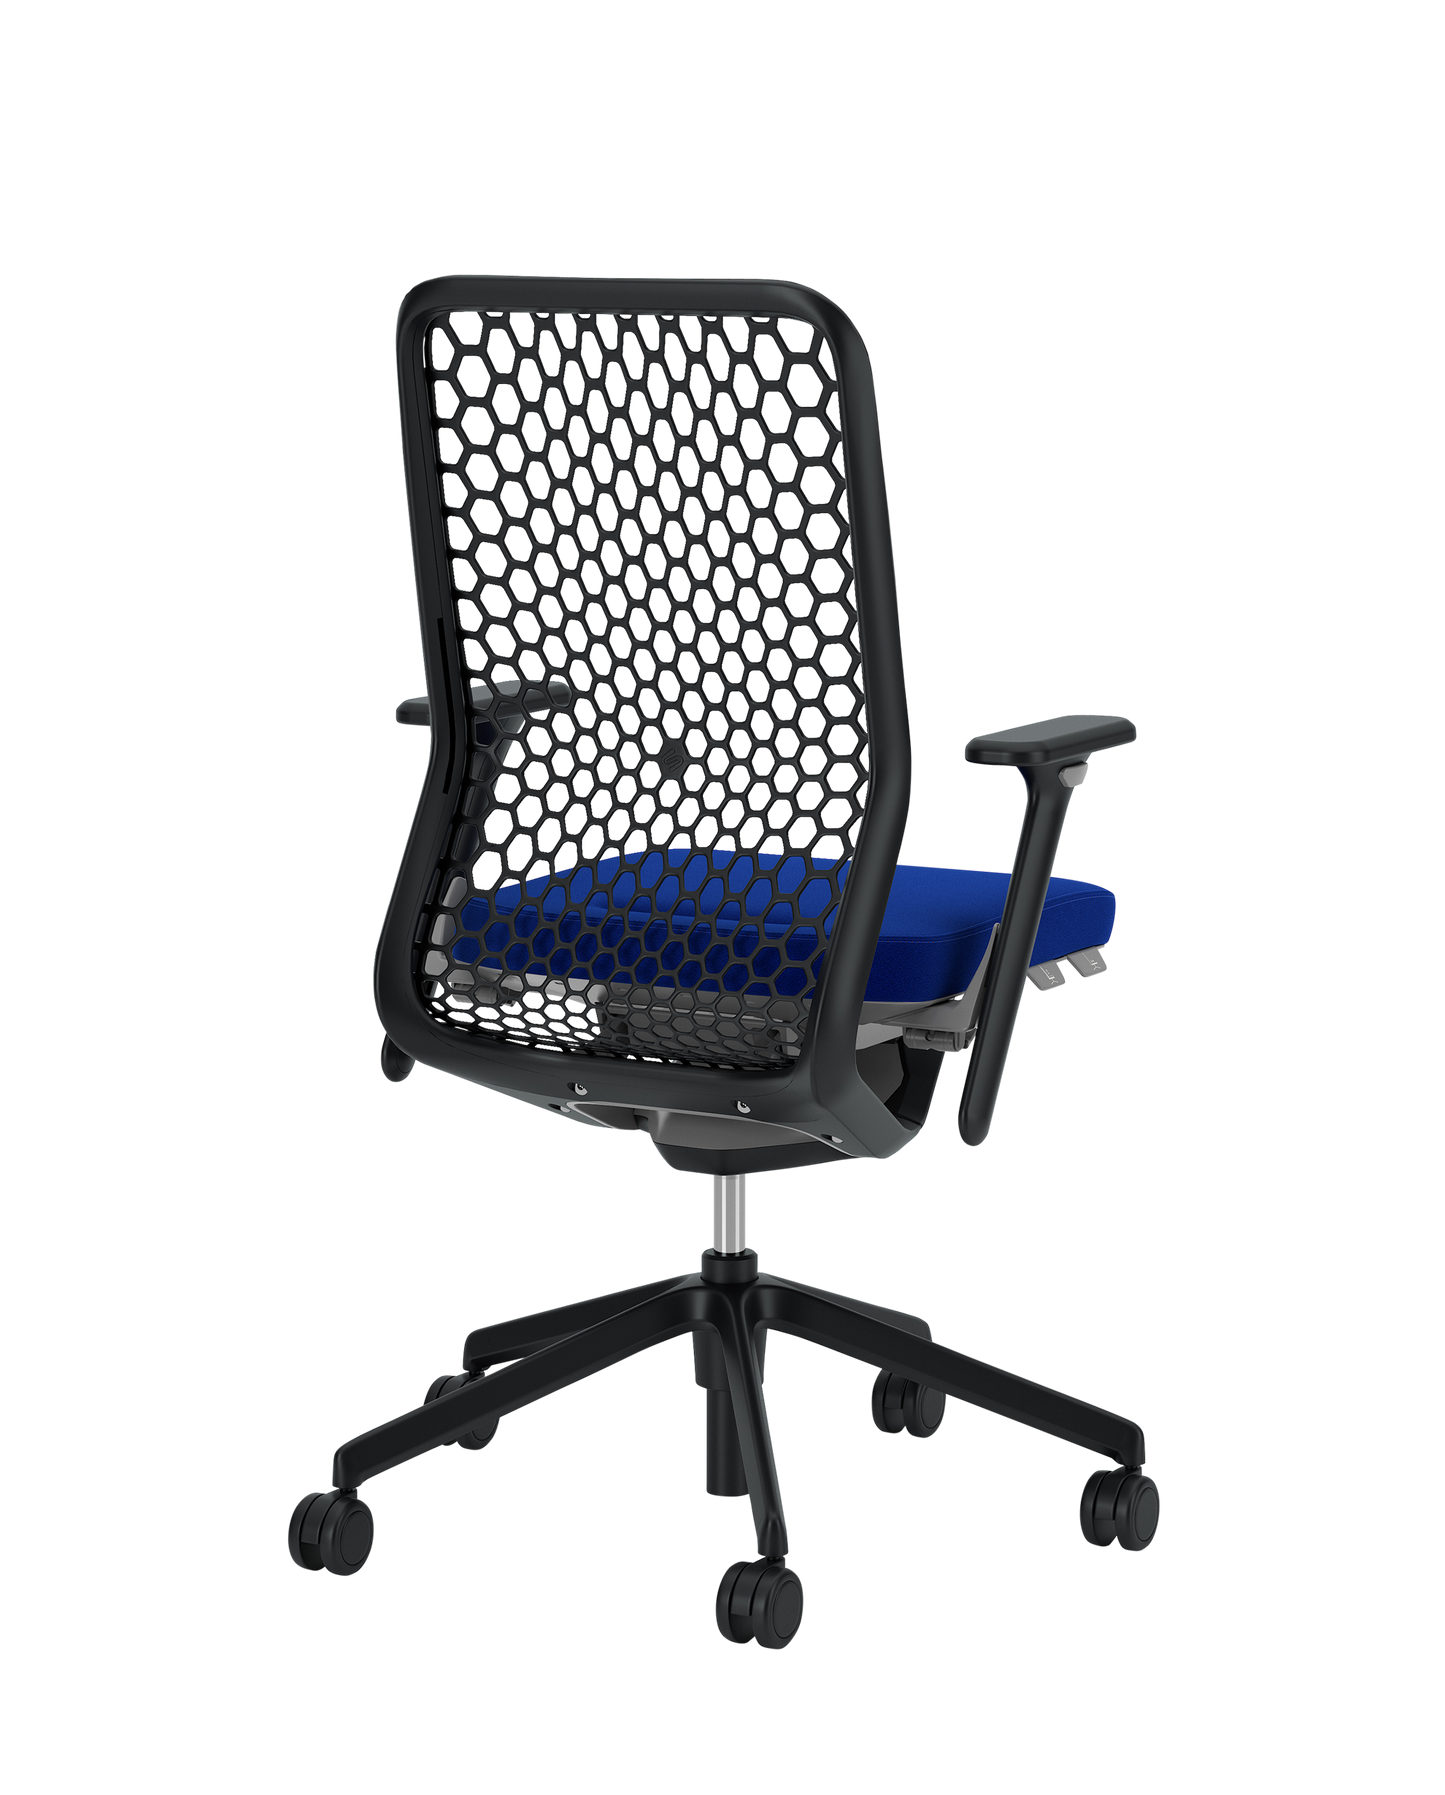 YouTEAM Office Chair